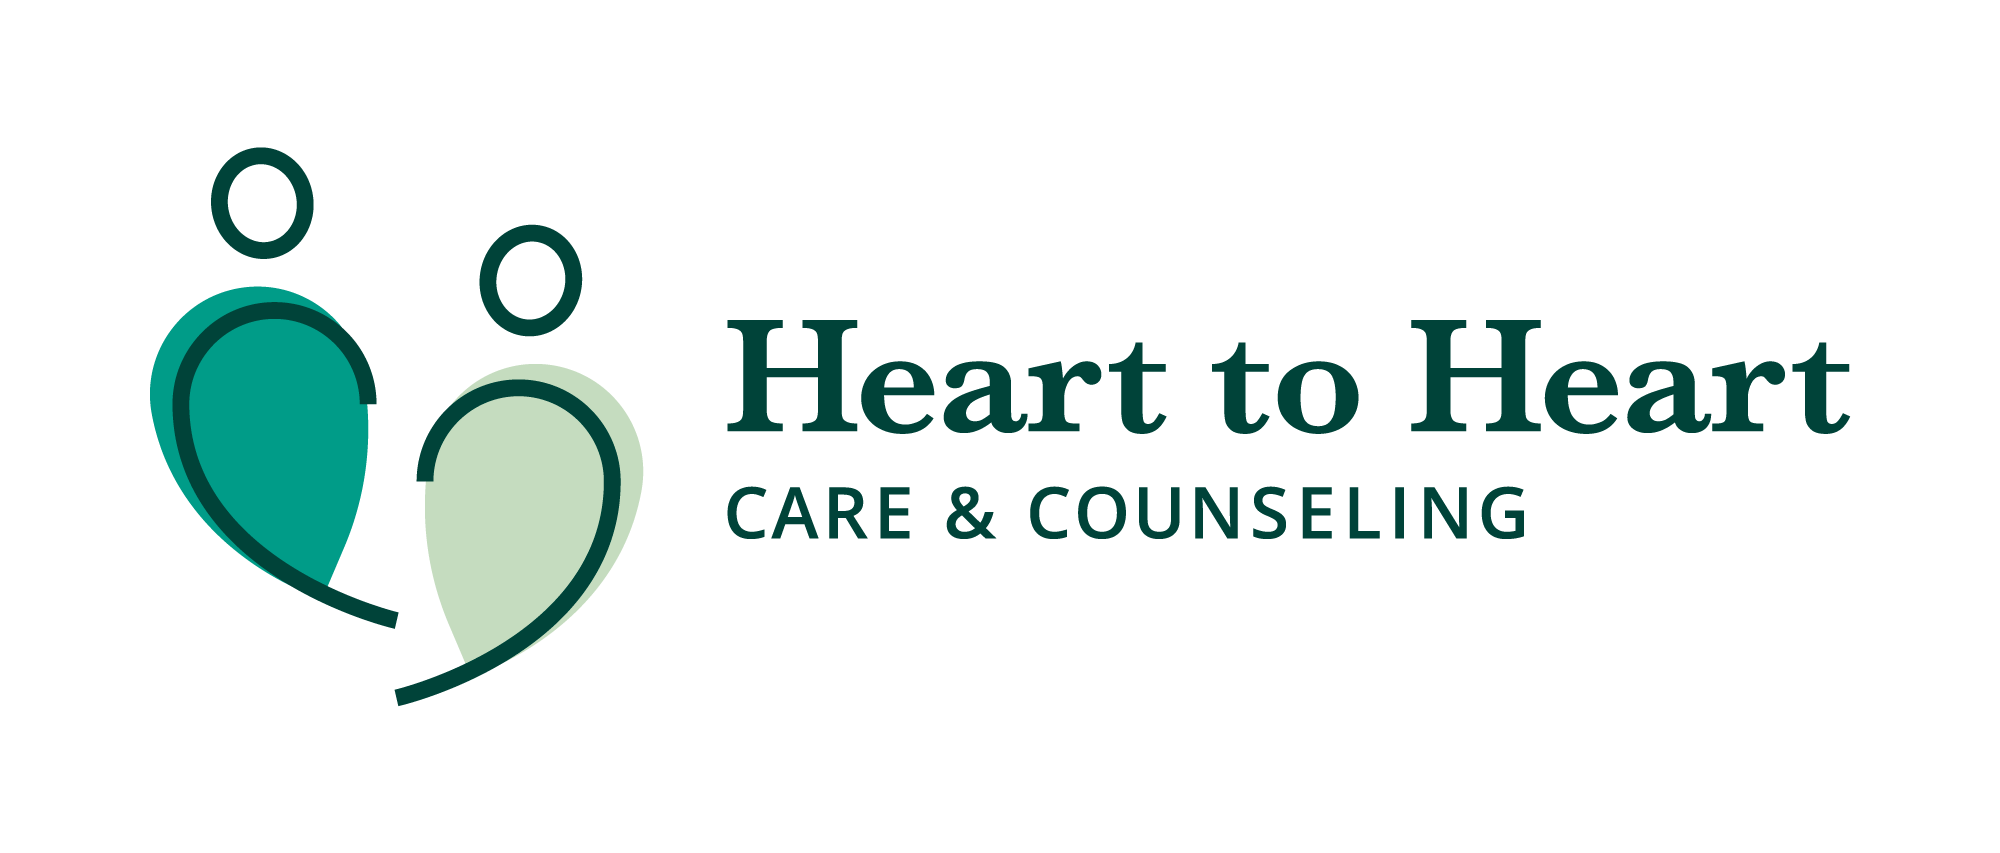 Heart To Heart Care & Counseling